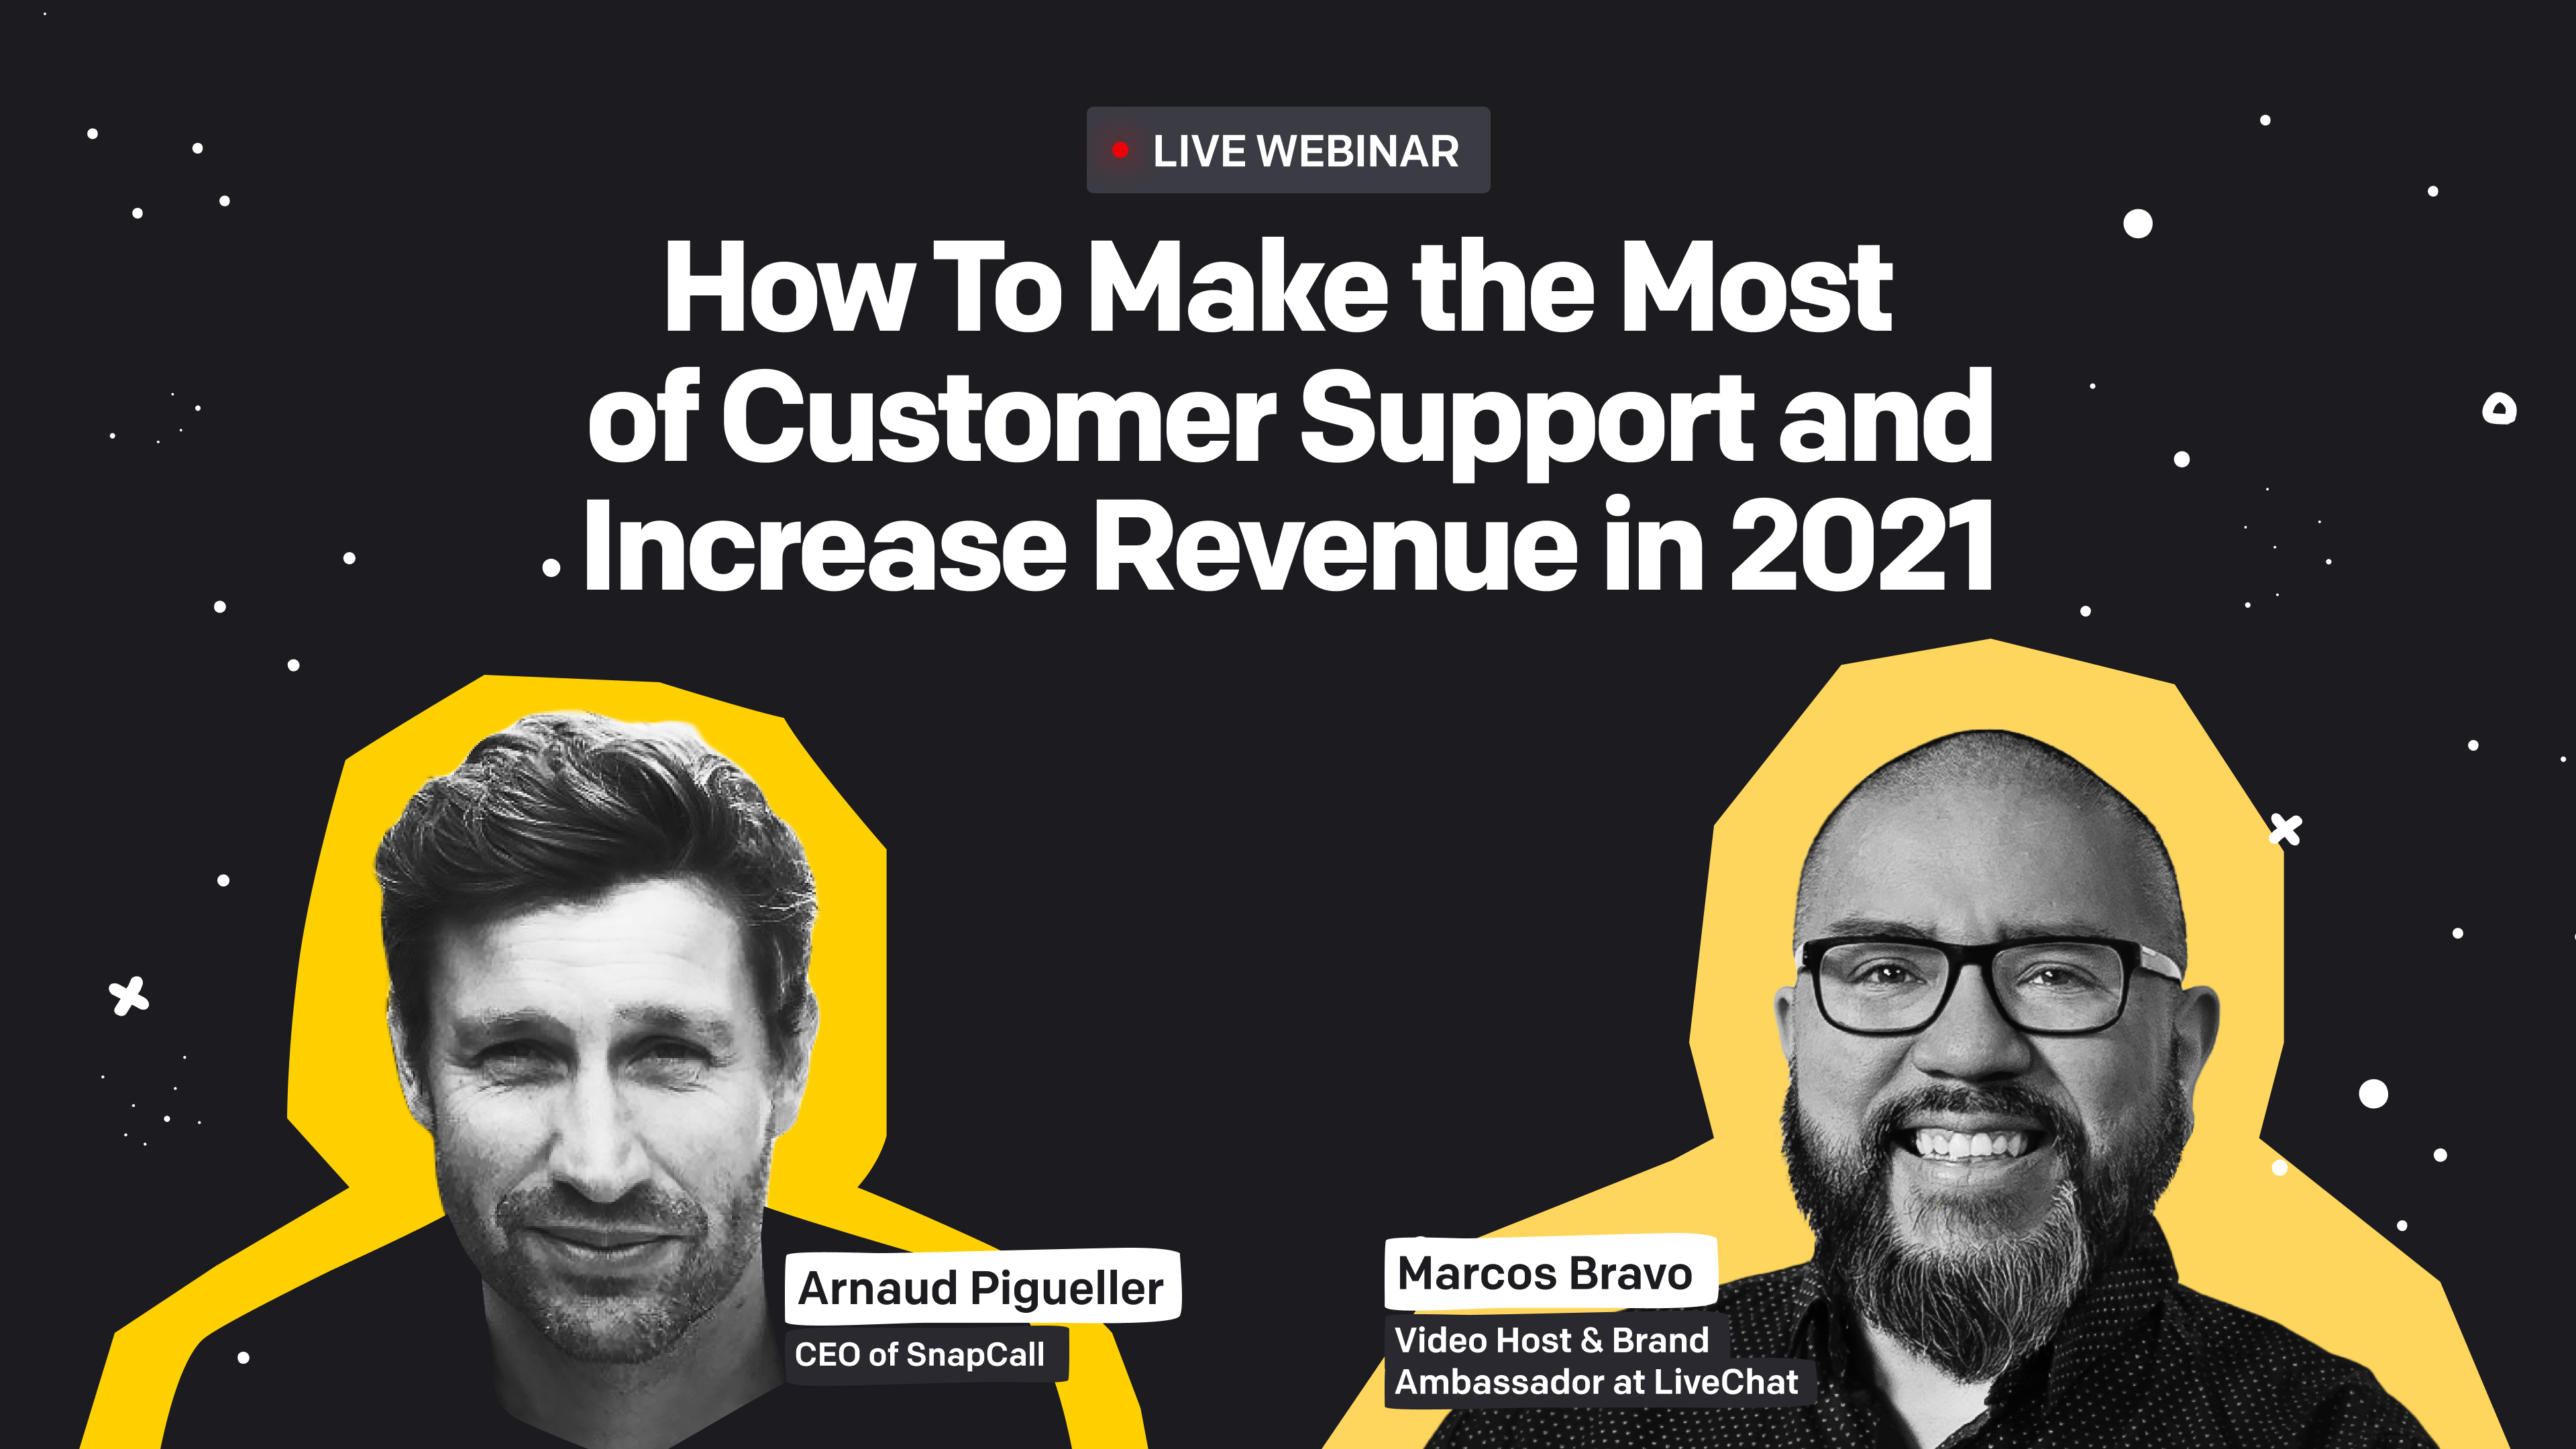 How To Make the Most of Customer Support and Increase Revenue in 2021